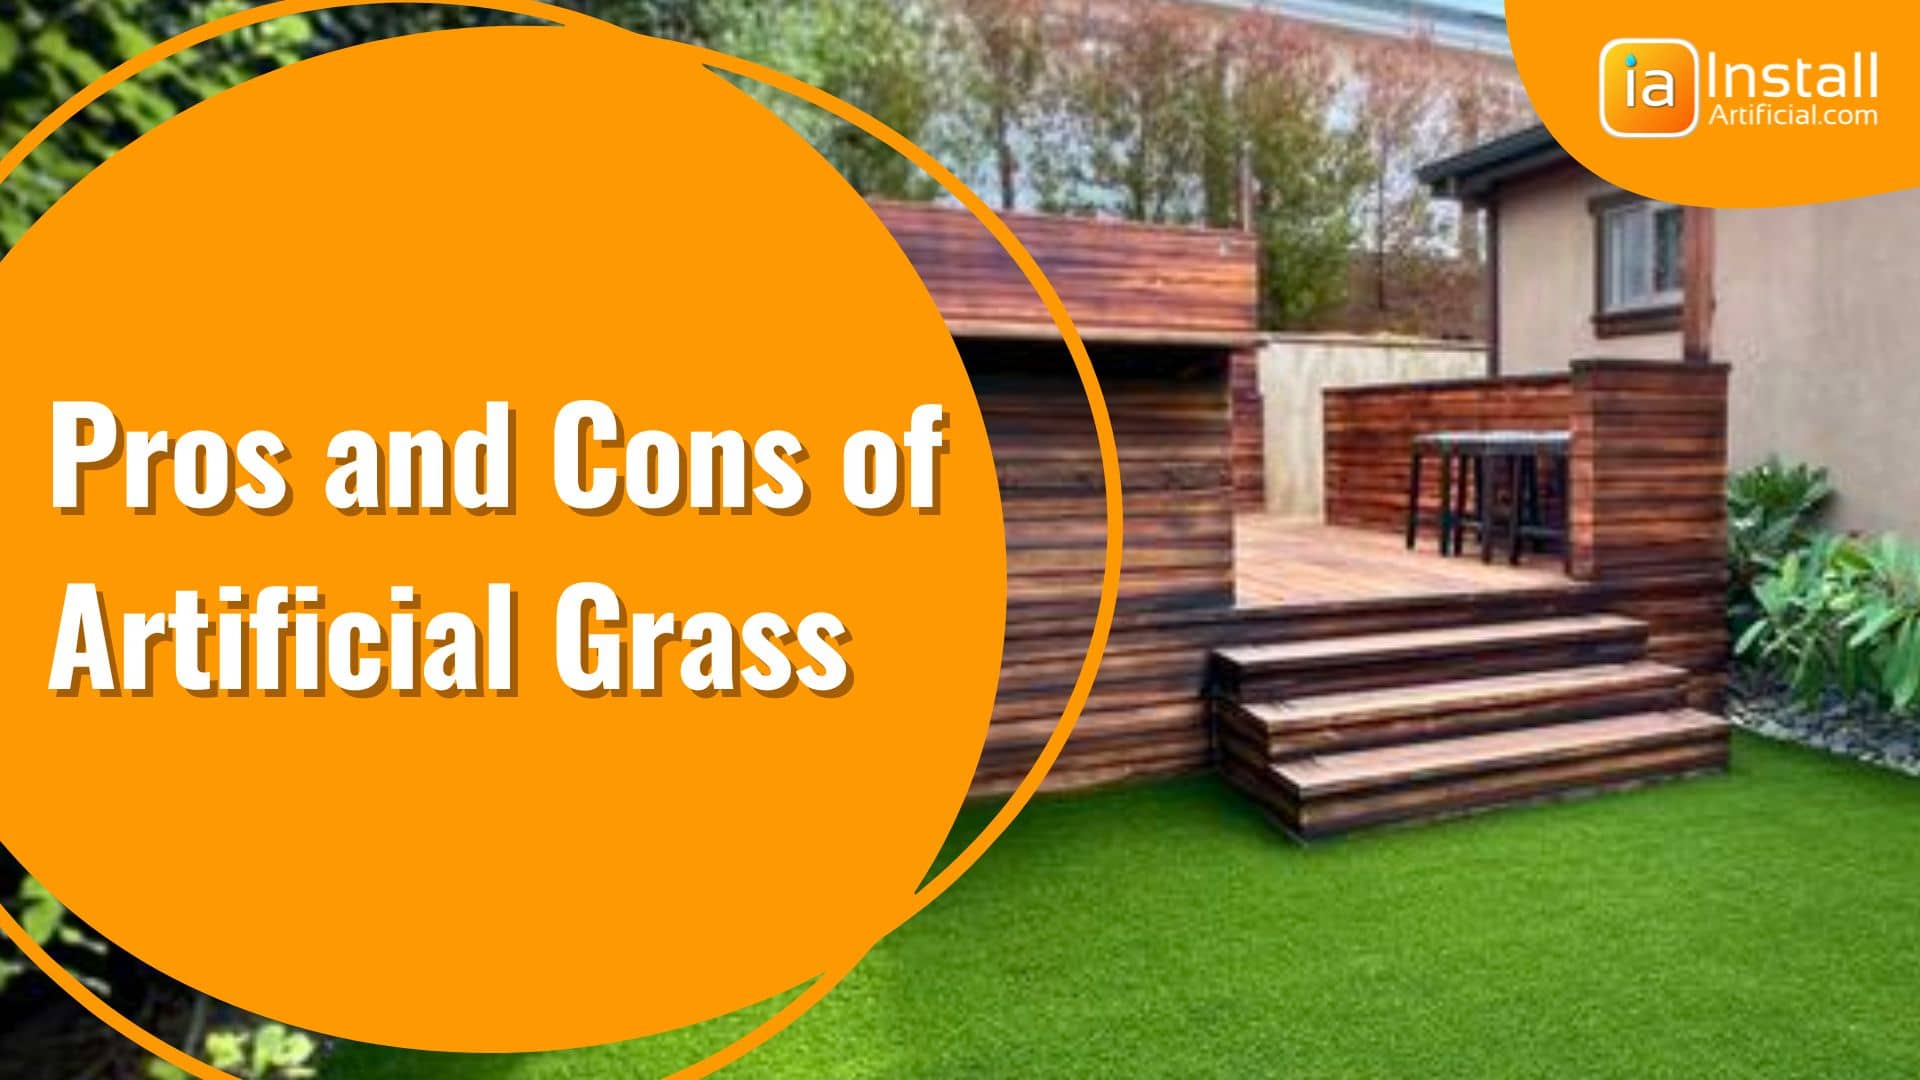 https://2357342.fs1.hubspotusercontent-na1.net/hubfs/2357342/Blog/featured%20images%20for%20blogs/Pros%20and%20Cons%20of%20Artificial%20Grass.jpg